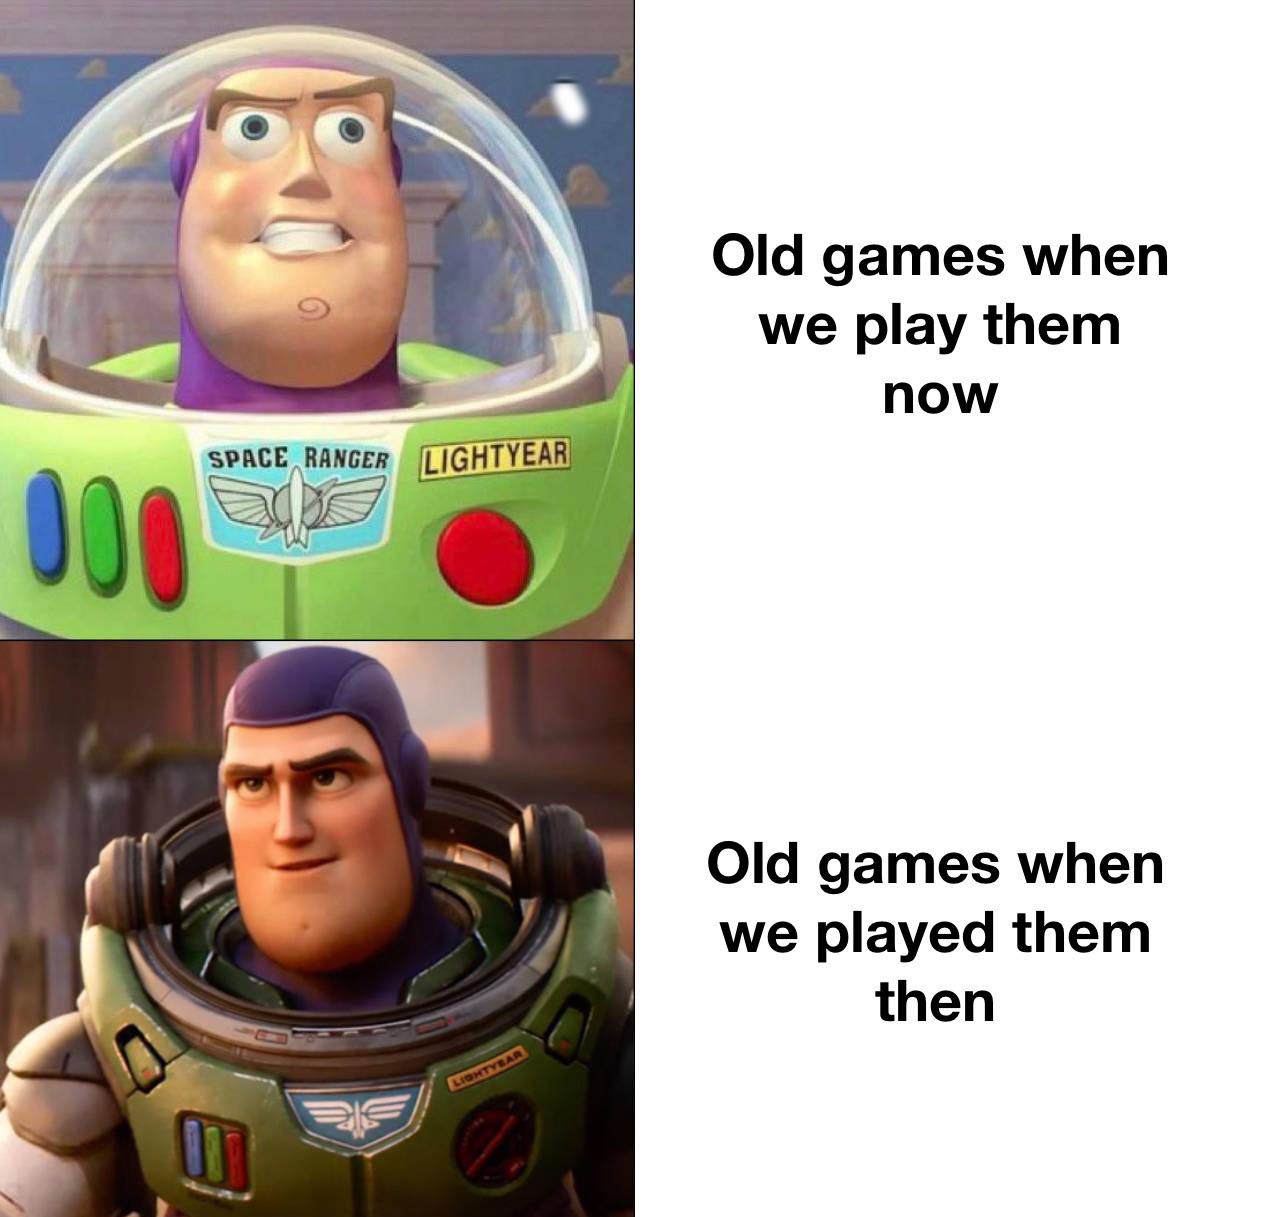 buzz lightyear meme - Old games when we play them now Space Ranger Lightyear 000 Old games when we played them then Liontyear